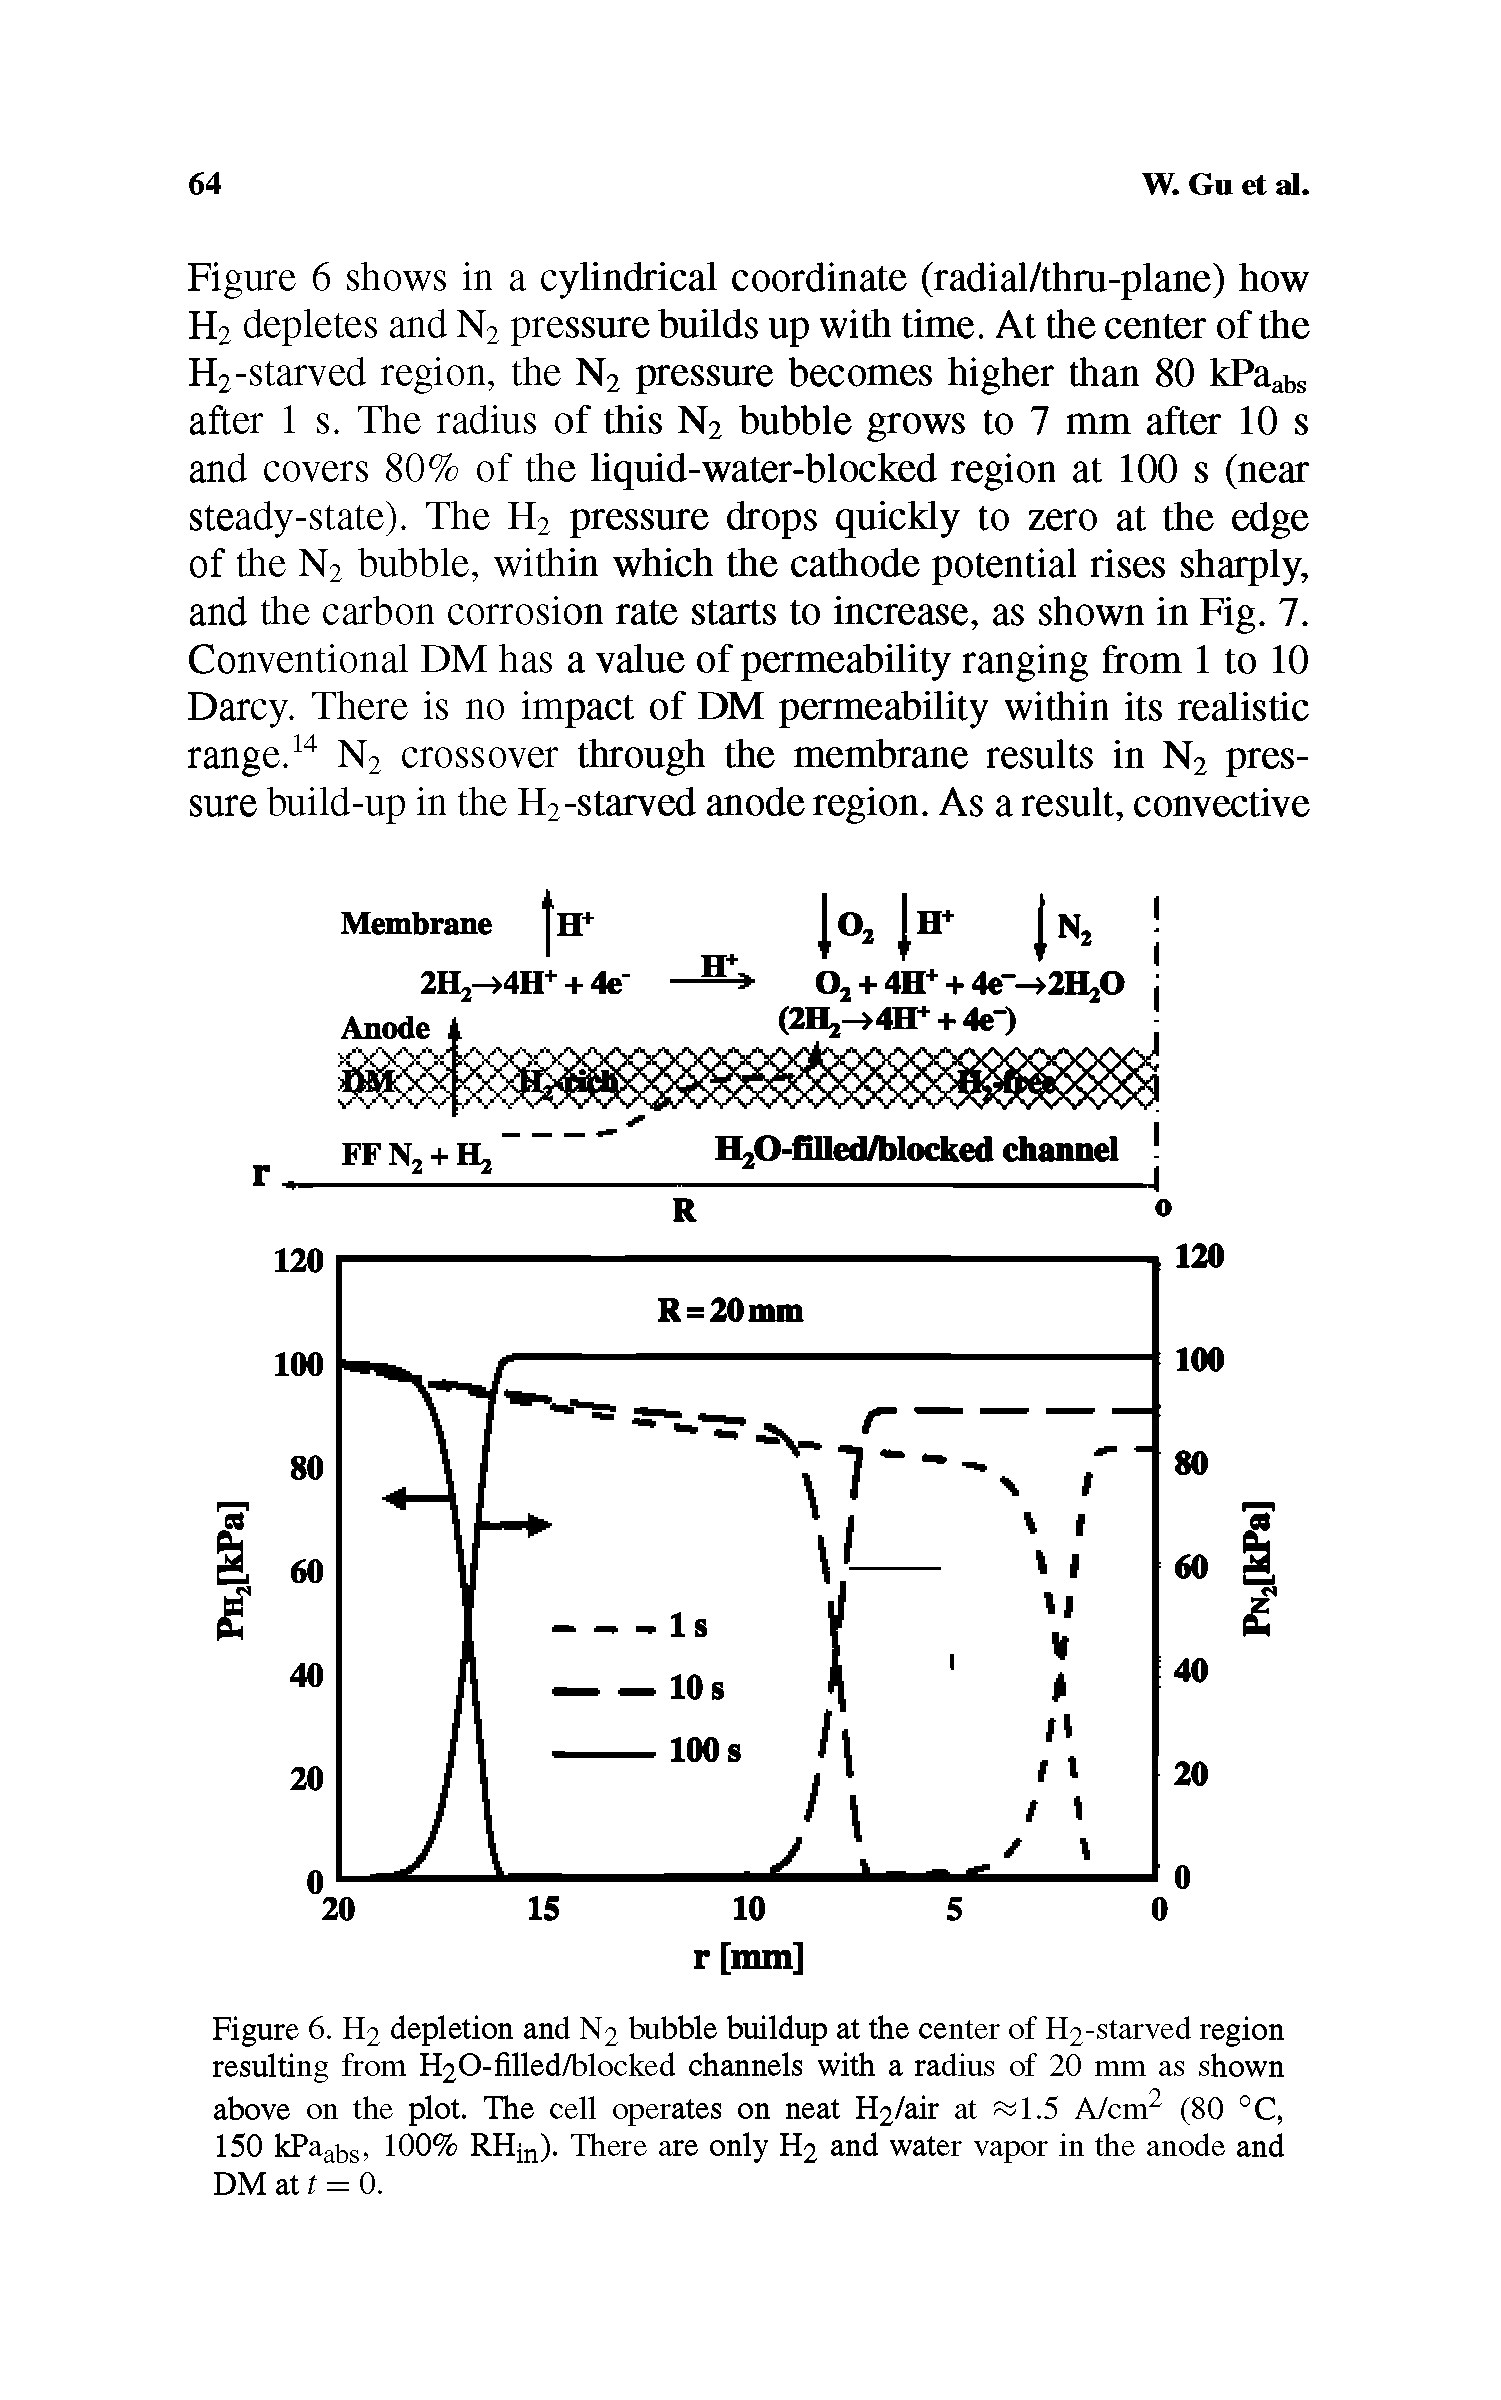 Figure 6. H2 depletion and N2 bubble buildup at the center of H2-starved region resulting from H20-filled/blocked channels with a radius of 20 mm as shown above on the plot. The cell operates on neat H2/air at f 1.5 A/cm2 (80 °C, 150 kPaabs, 100% RHjn). There are only H2 and water vapor in the anode and DM at t = 0.